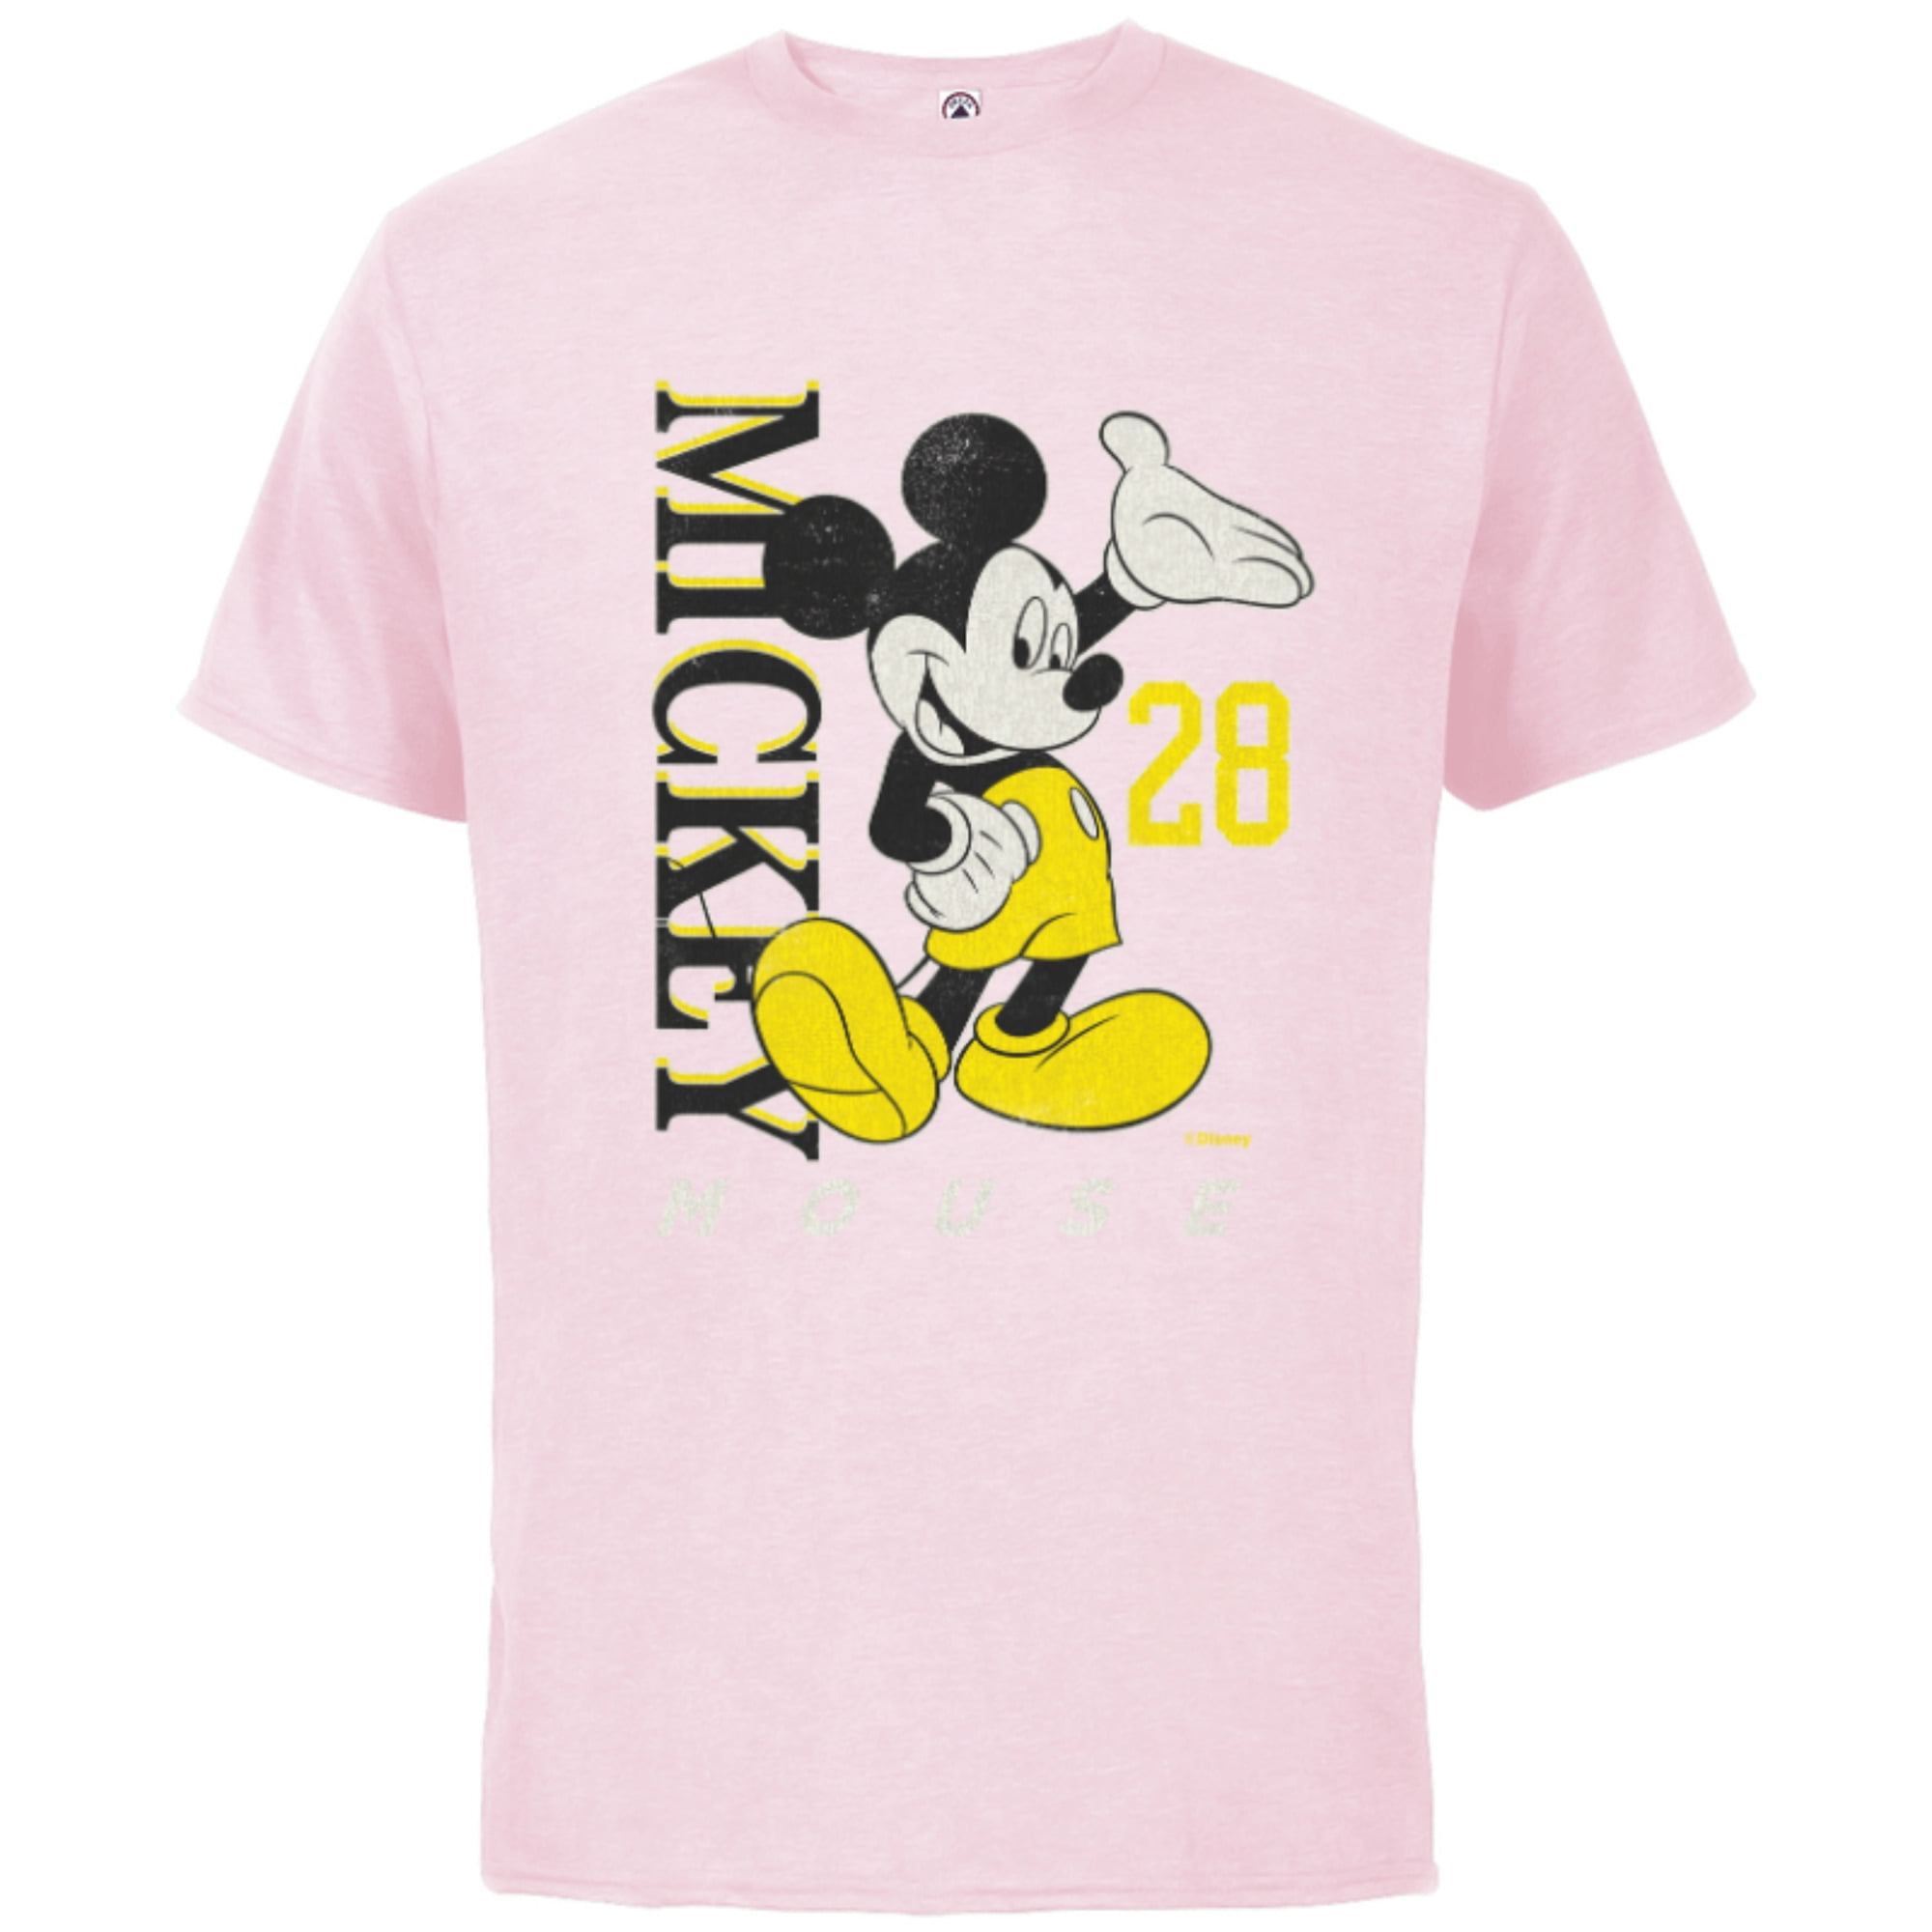 Disney Mickey Mouse Vintage Classics Black 28 Customized-Black & Yellow - Cotton T-Shirt Sleeve - Short Adults for